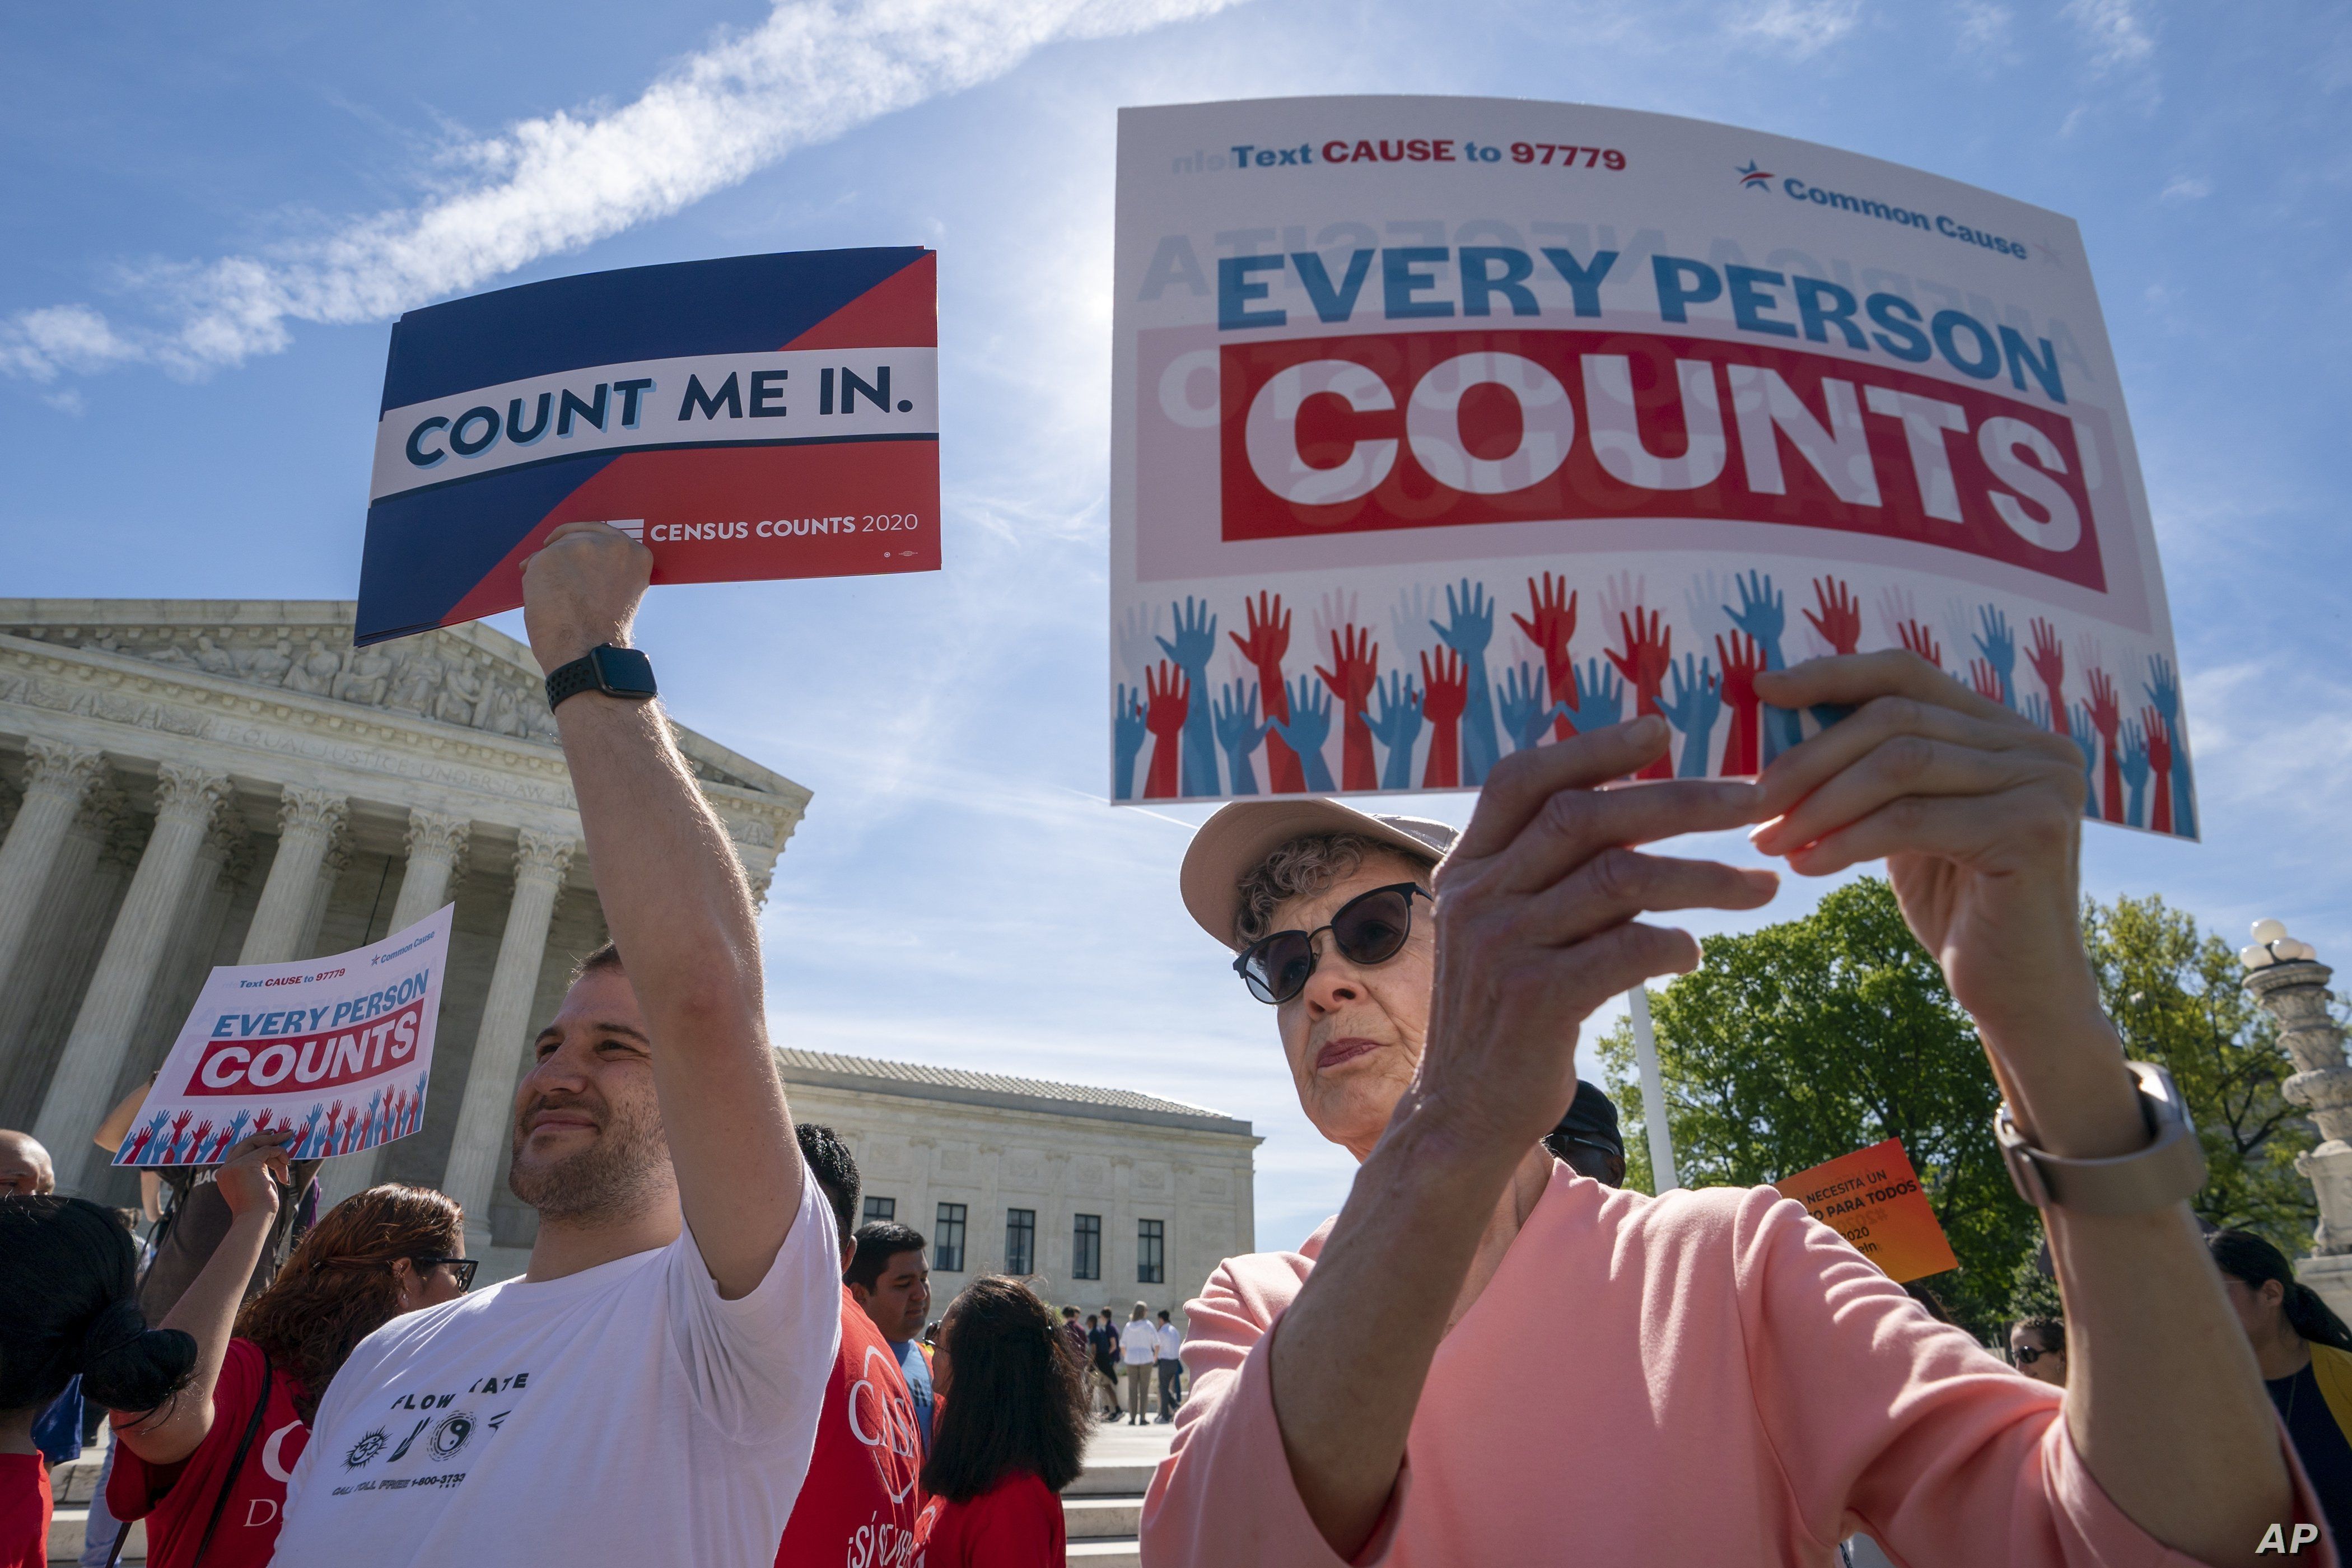 Immigration activists rally outside the Supreme Court as the justices hear arguments over the Trump administration's plan to ask about citizenship on the 2020 census, in Washington, April 23, 2019.